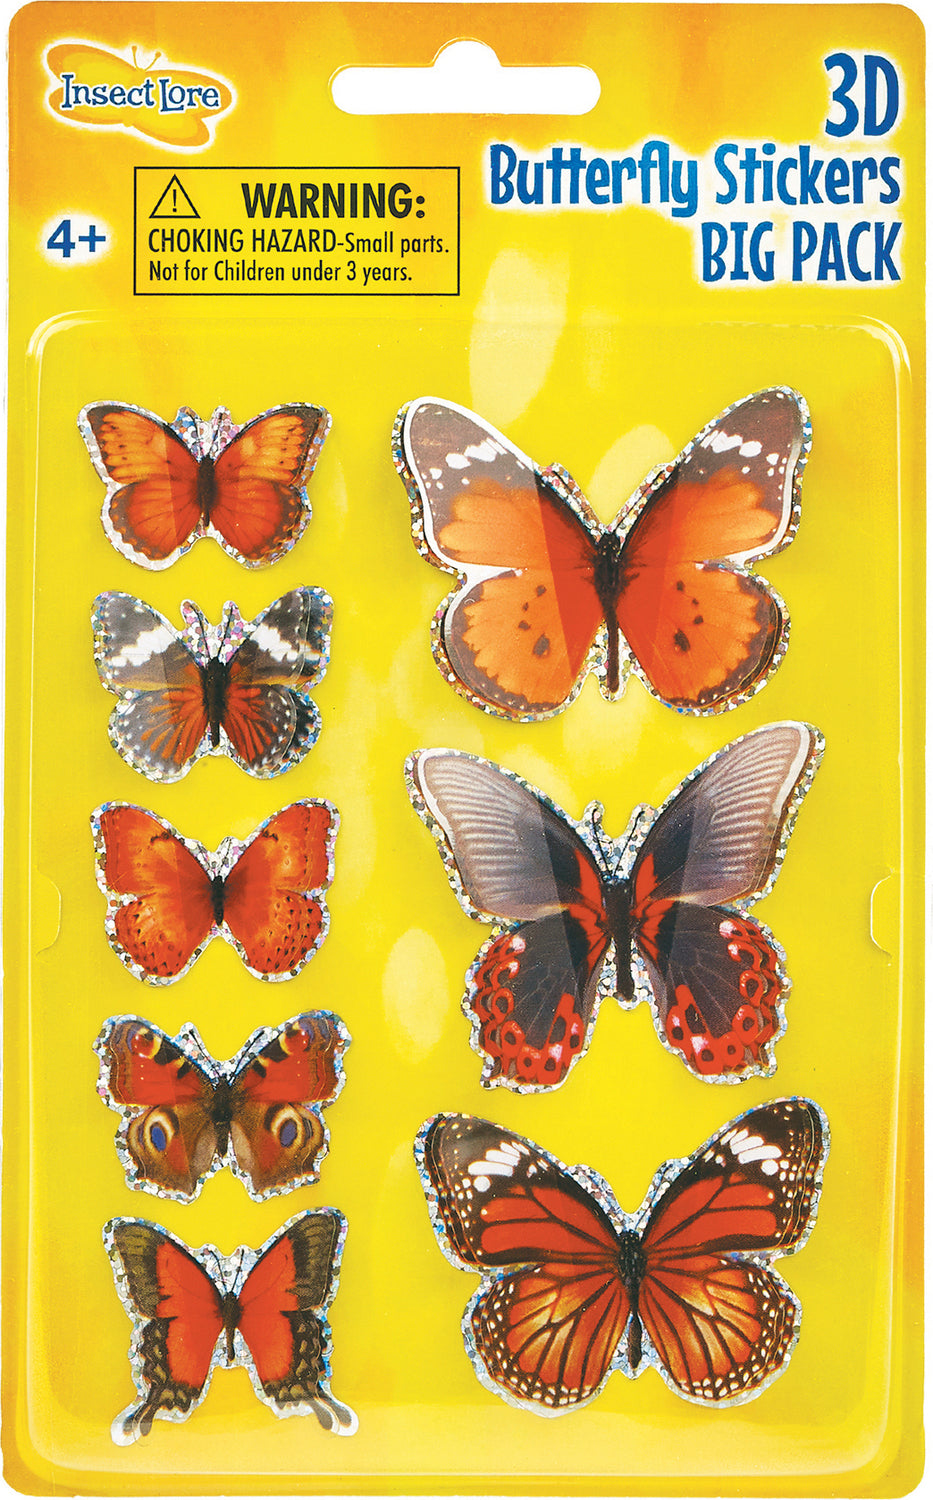 3D Butterfly Stickers BIG PACK